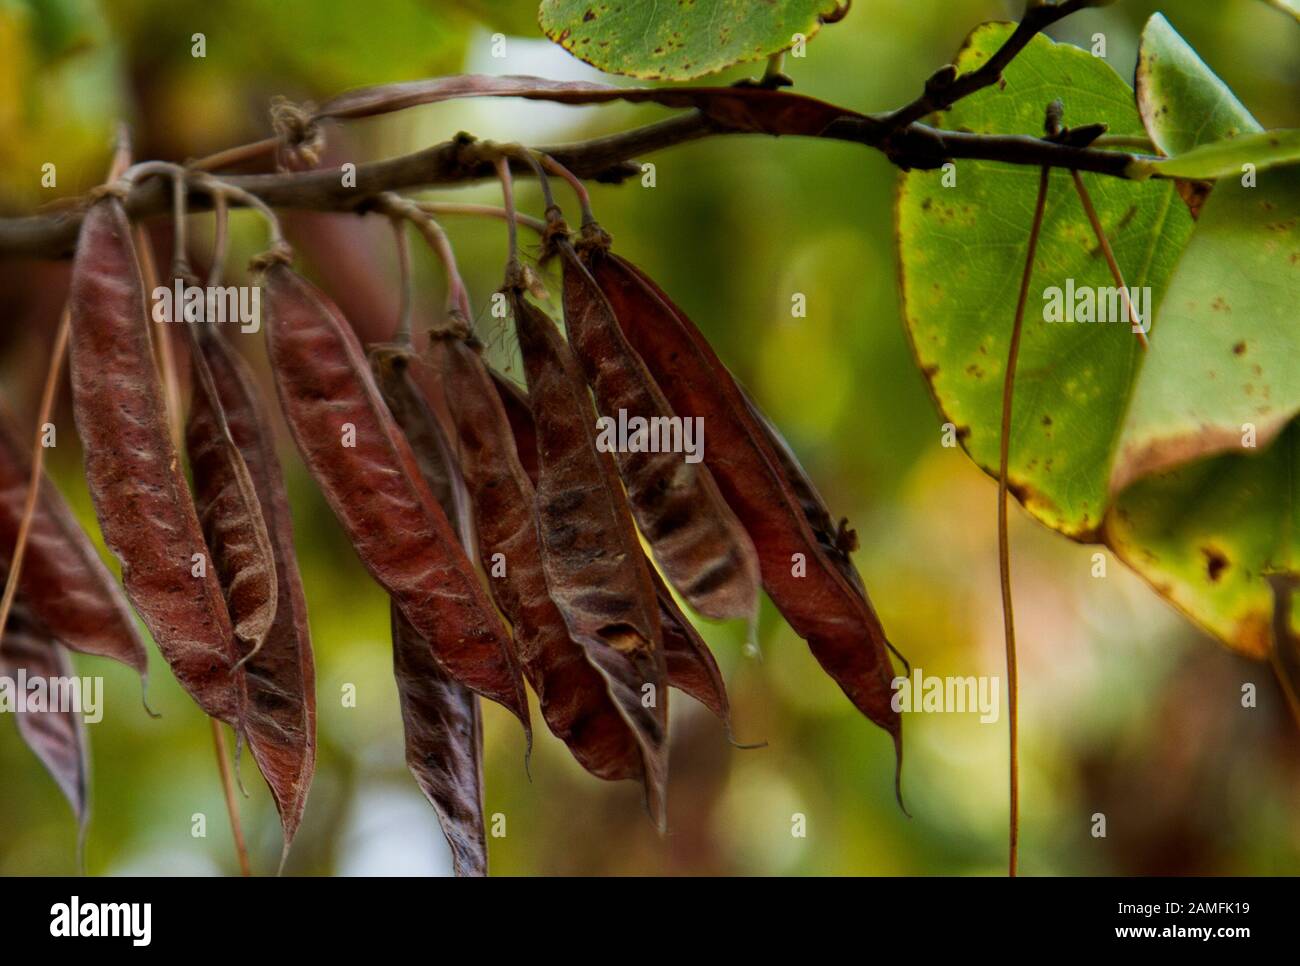 Seedpods of a Judas Tree Cercis siliquastrum Photographed in Israel in September Stock Photo